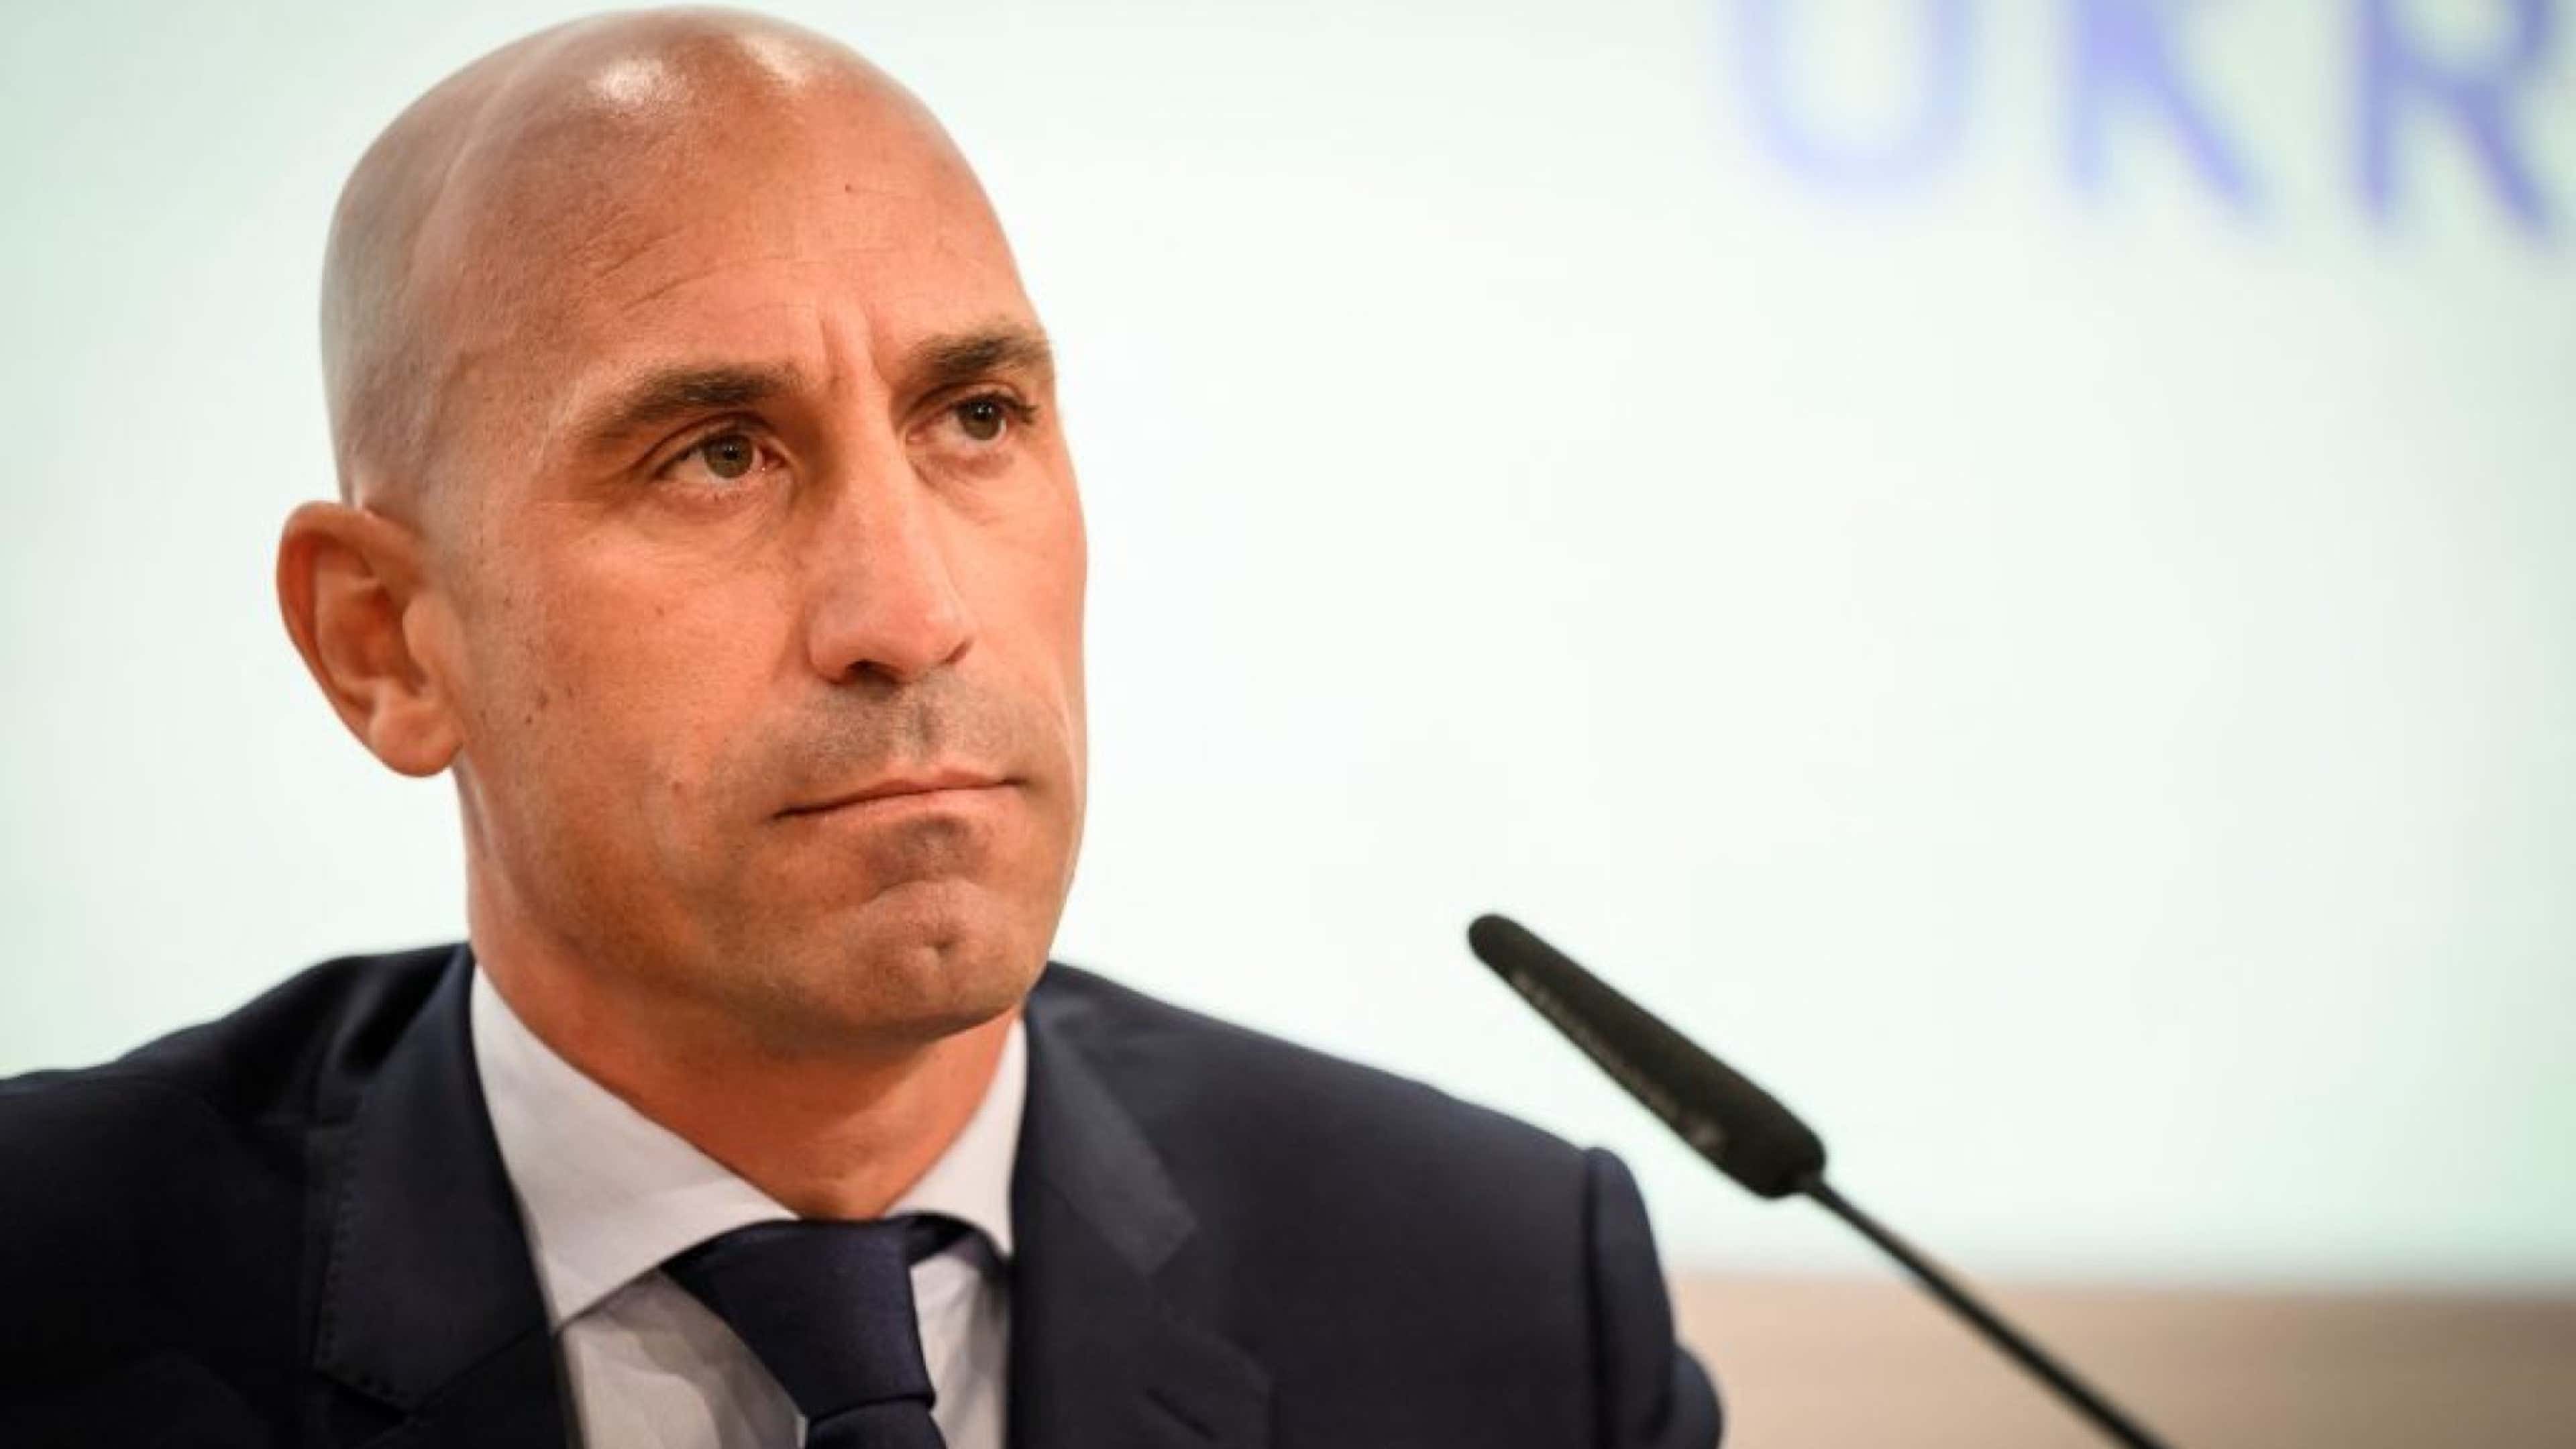 Spain's world champions refuse to play while Luis Rubiales is RFEF